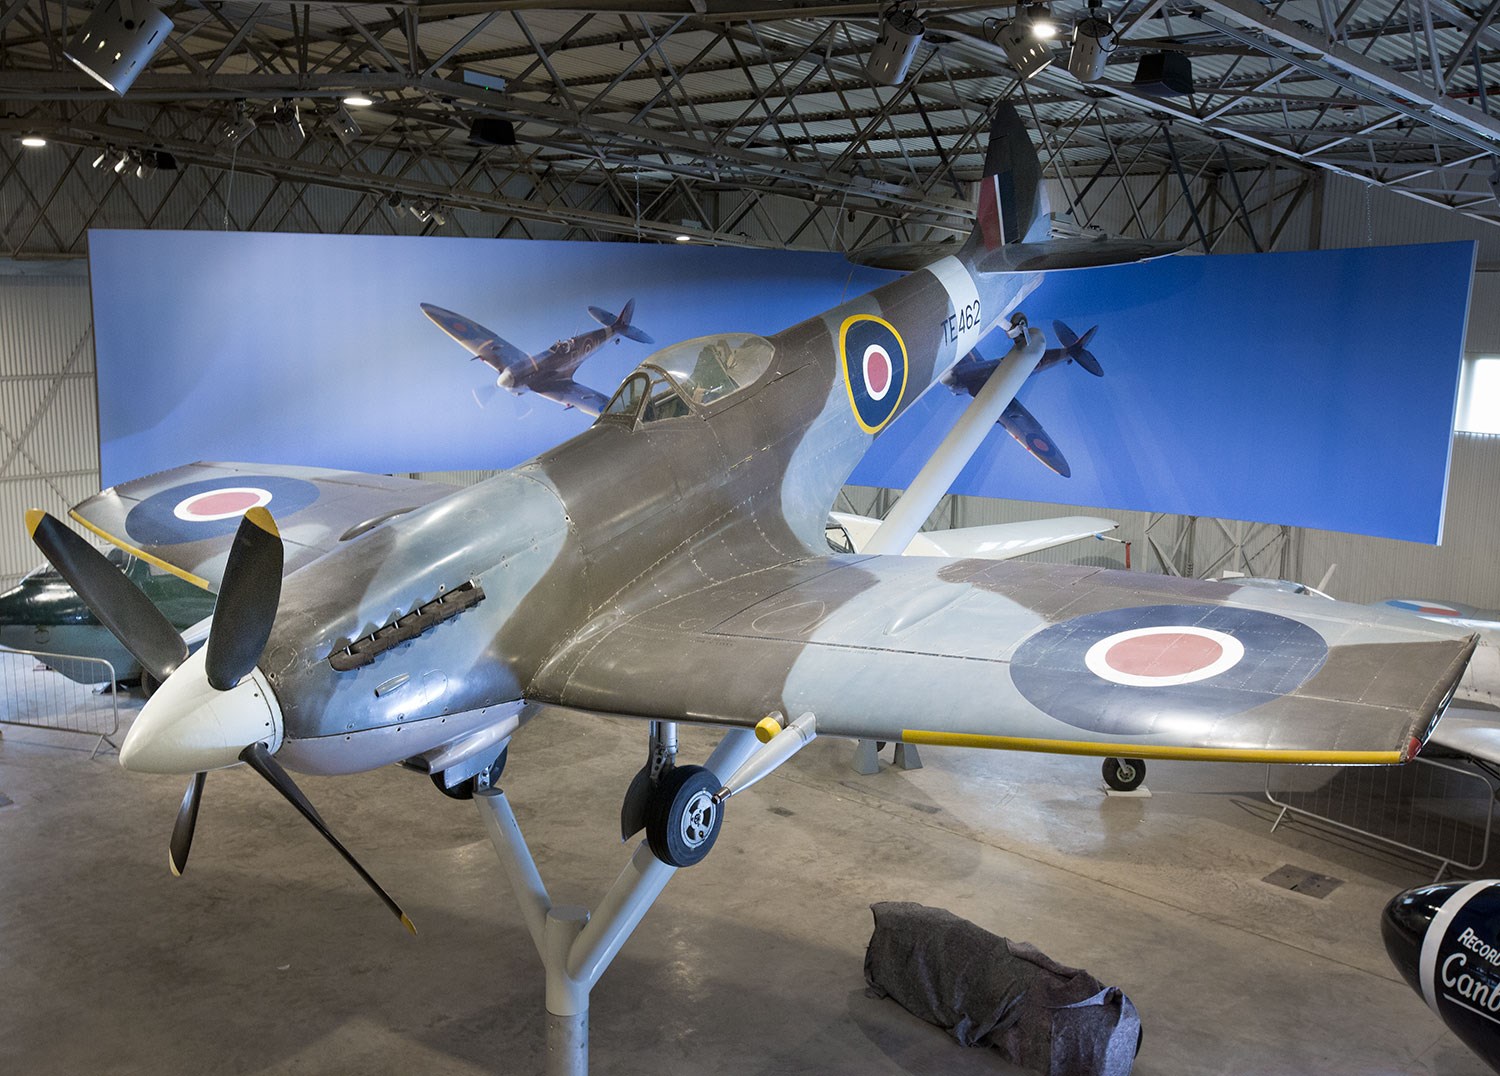 Supermarine Spitfire on display at the National Museum of Flight. In the background is a curved picture with two spitfires flying.